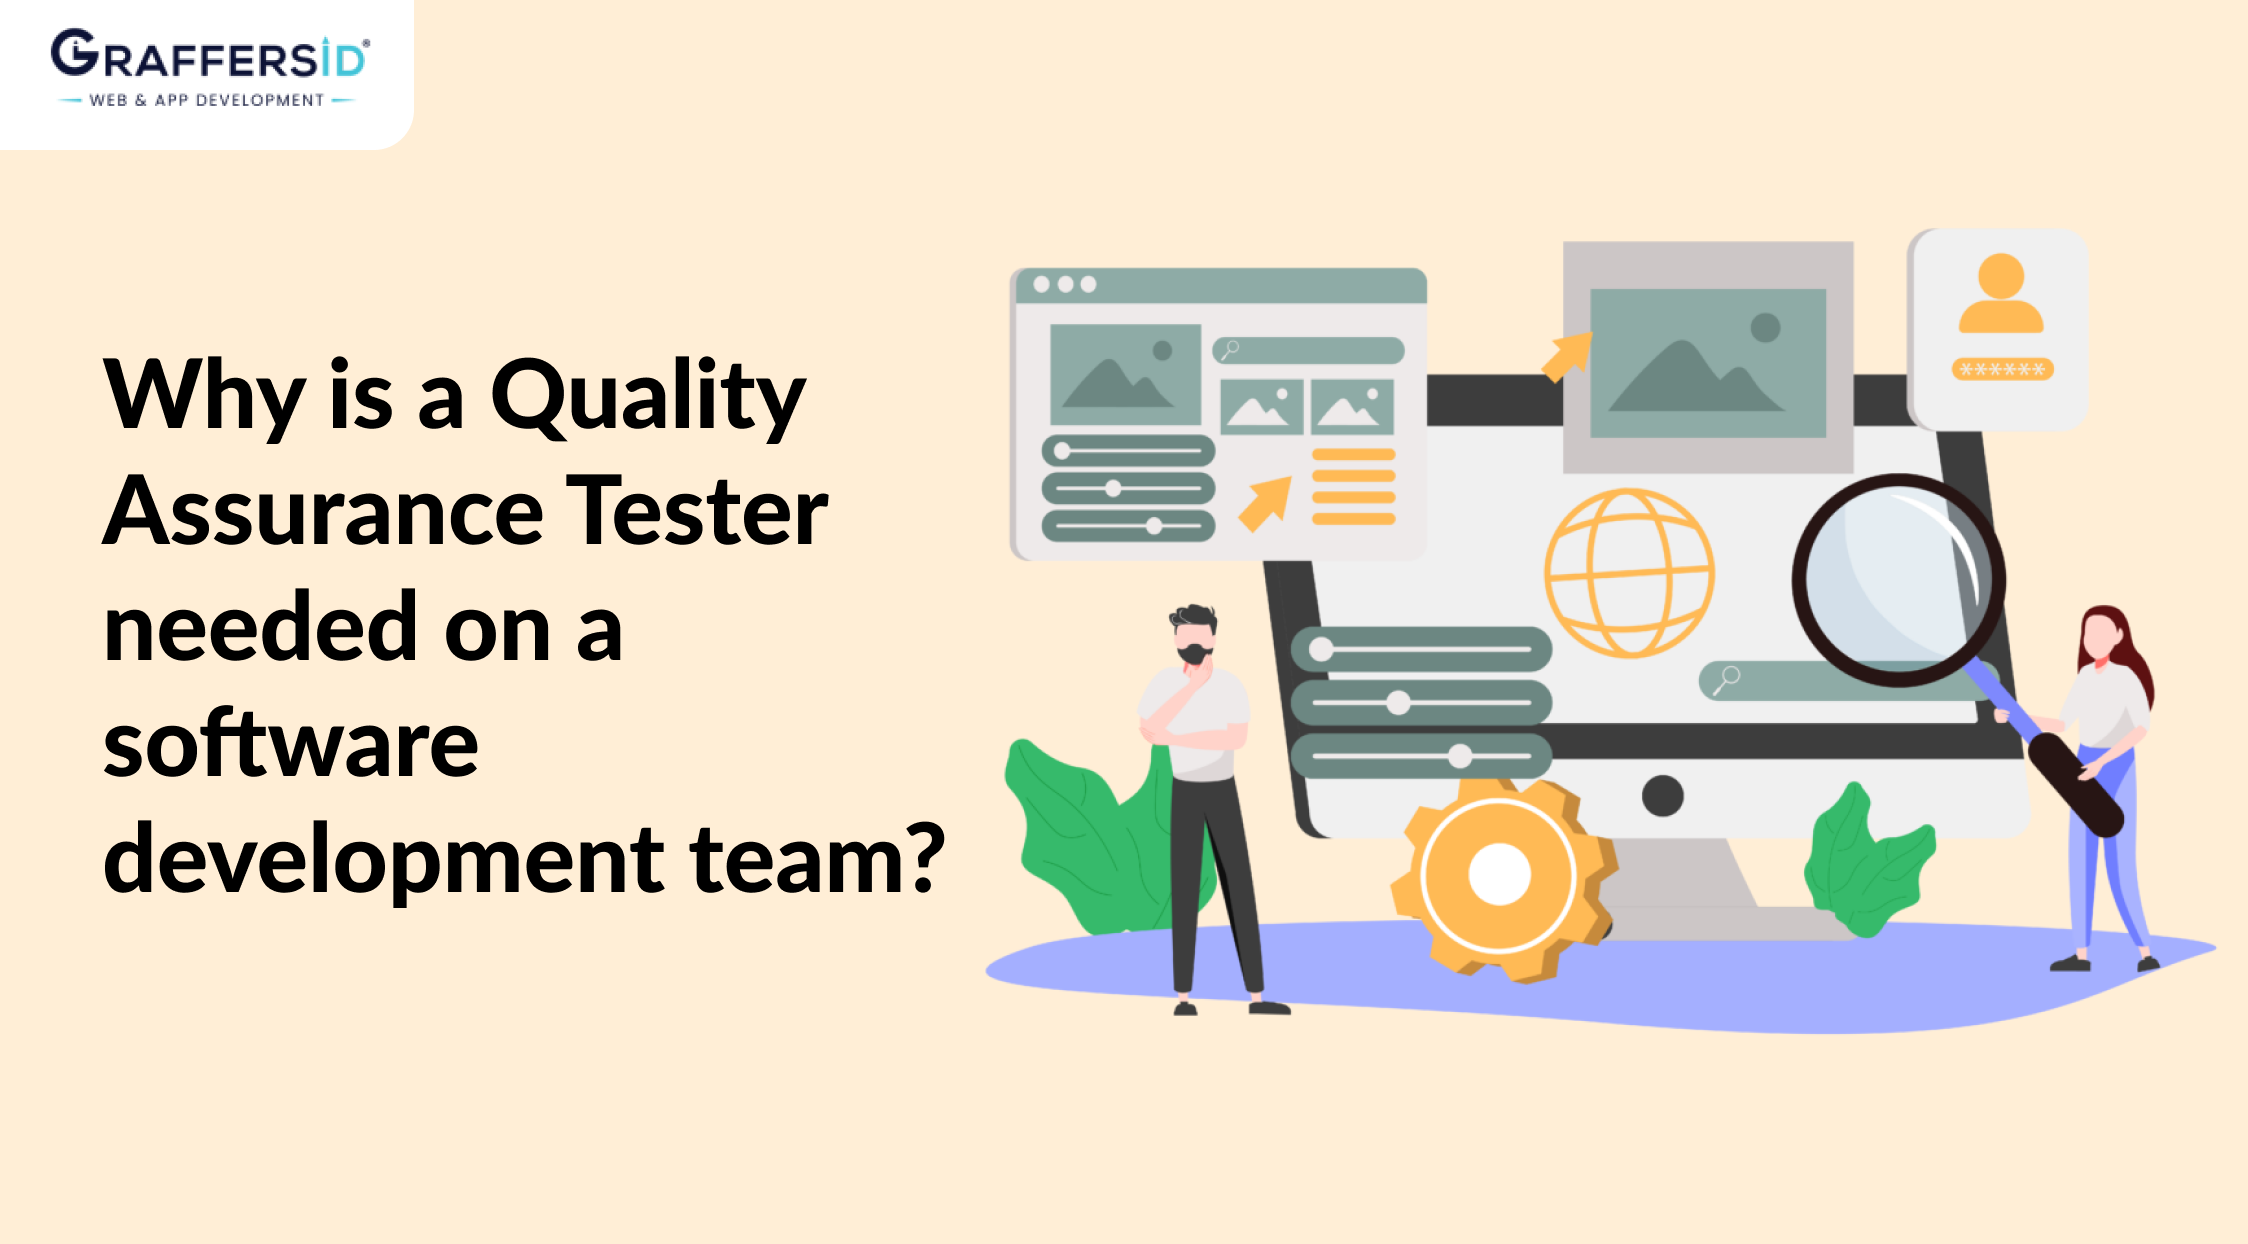 Why is a Quality Assurance Tester needed on a software development team